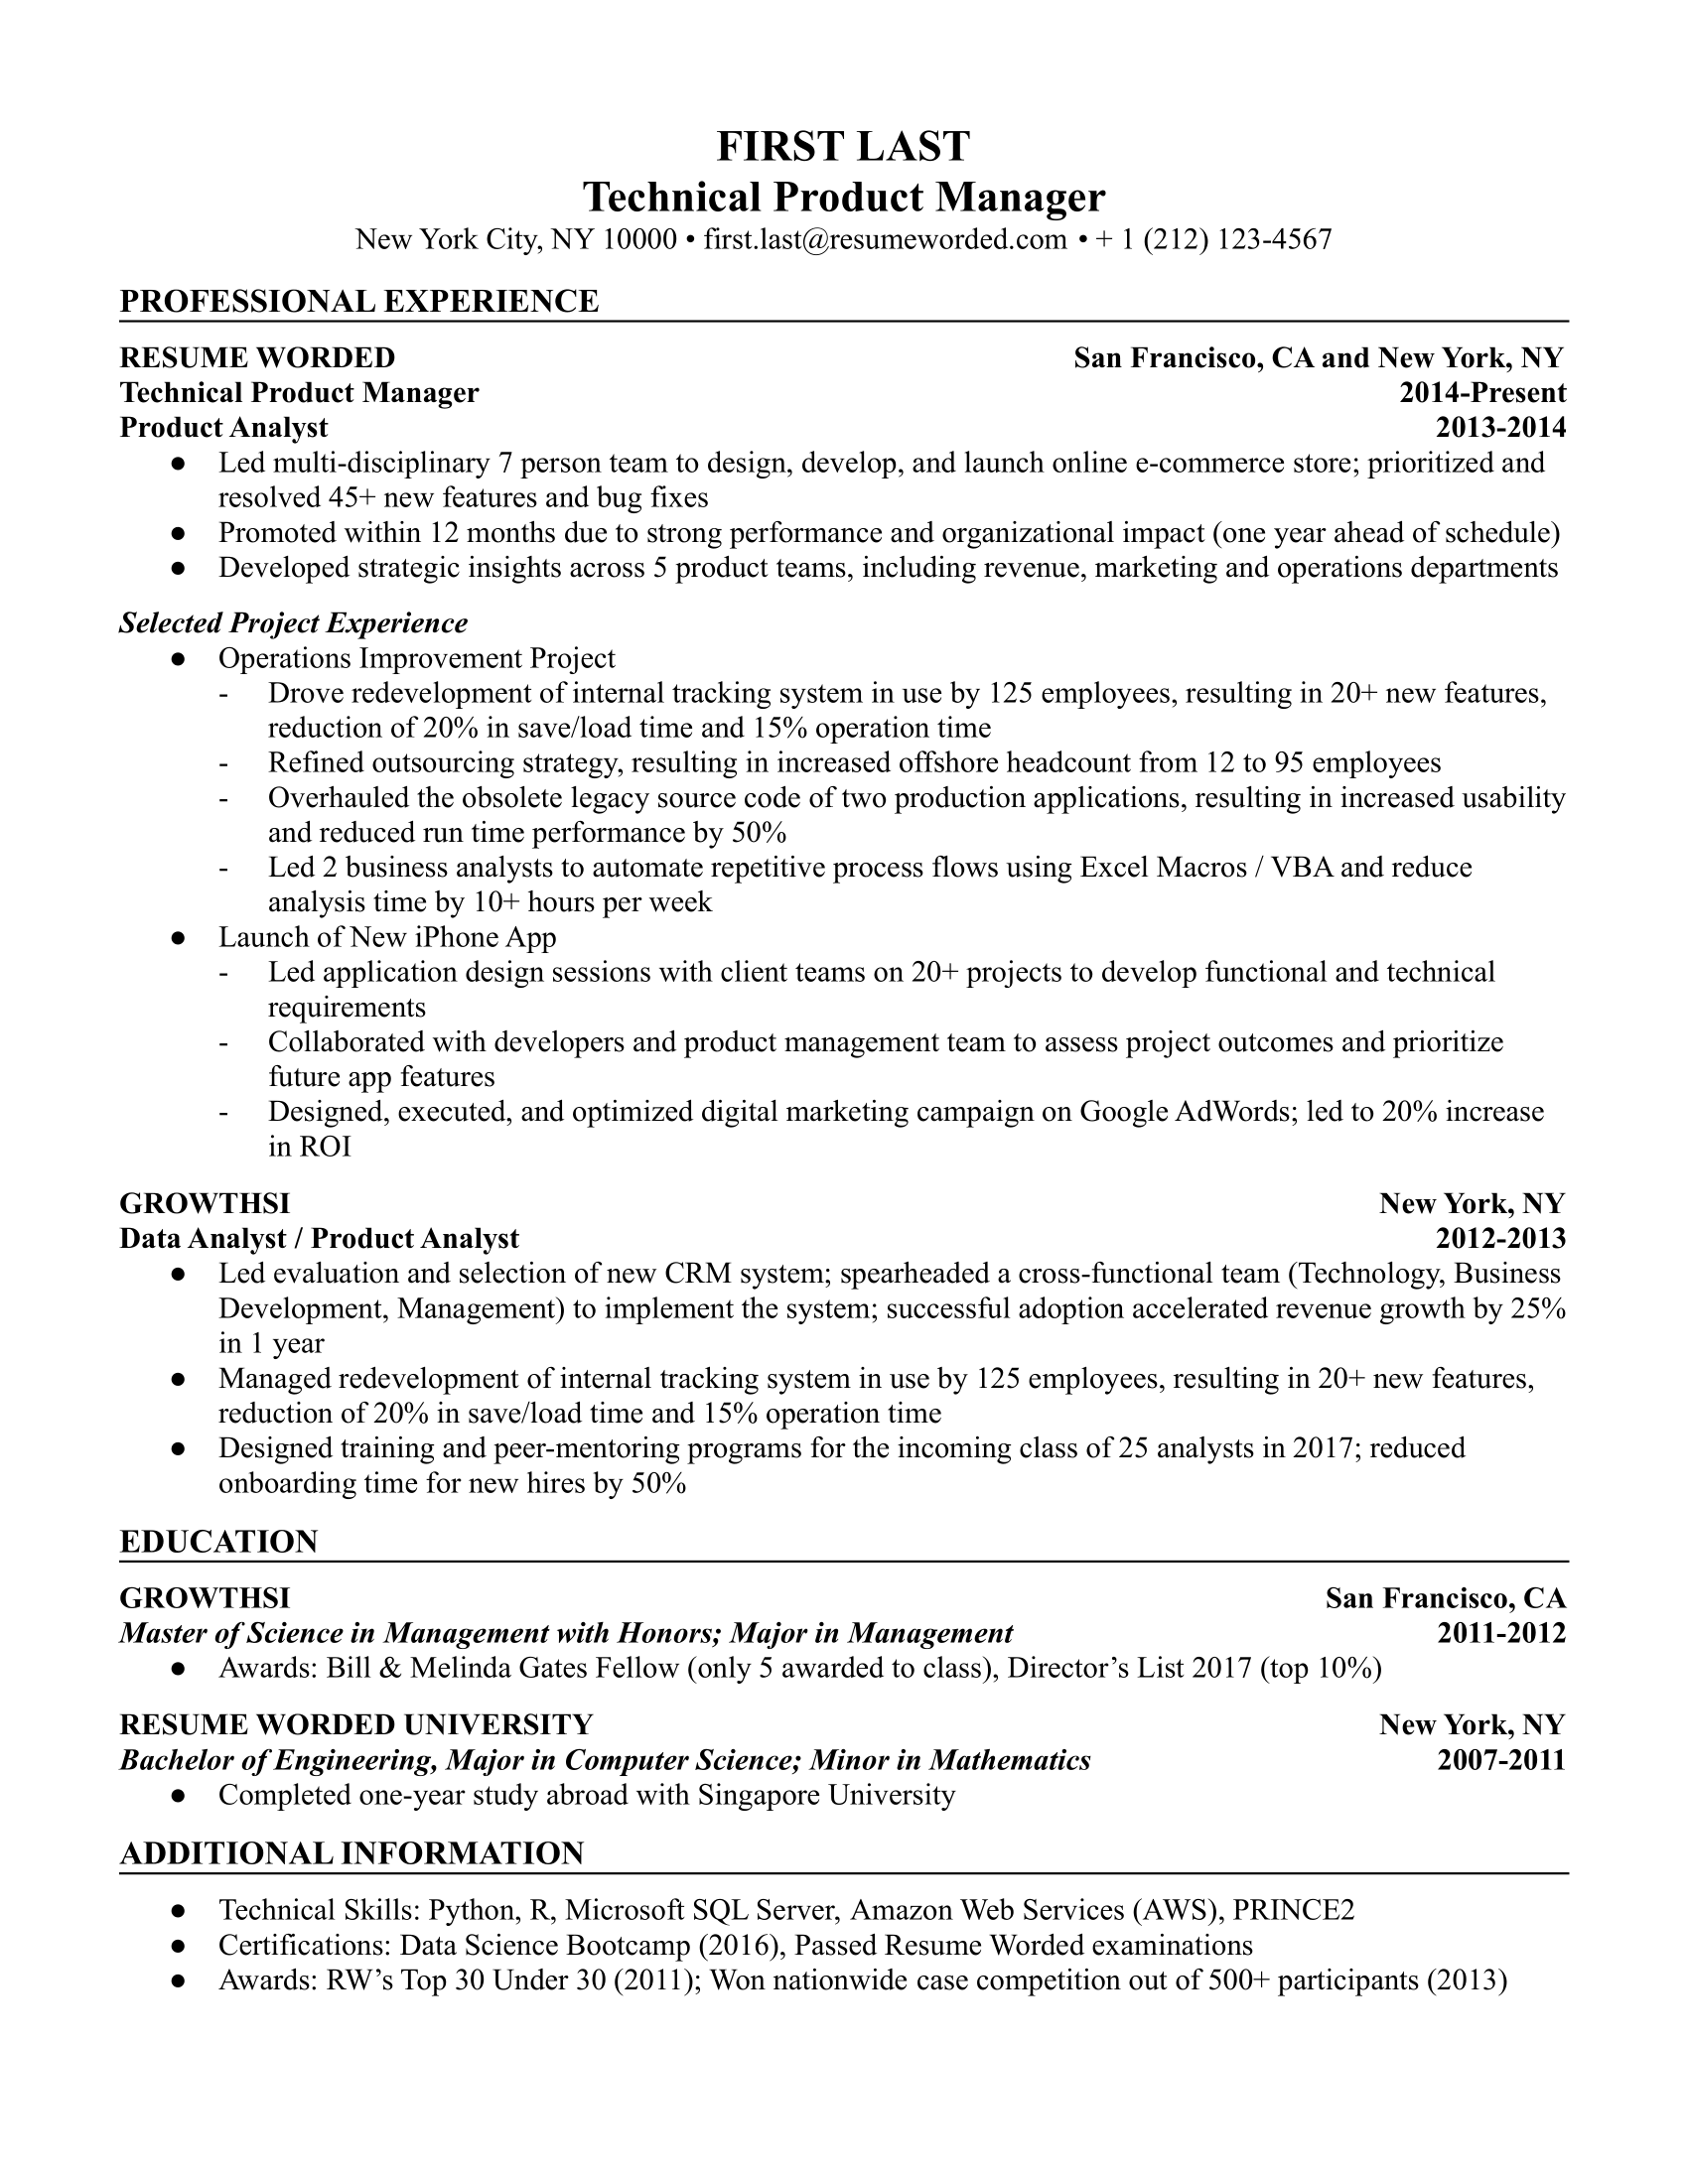 Technical Product Manager Resume Template + Example